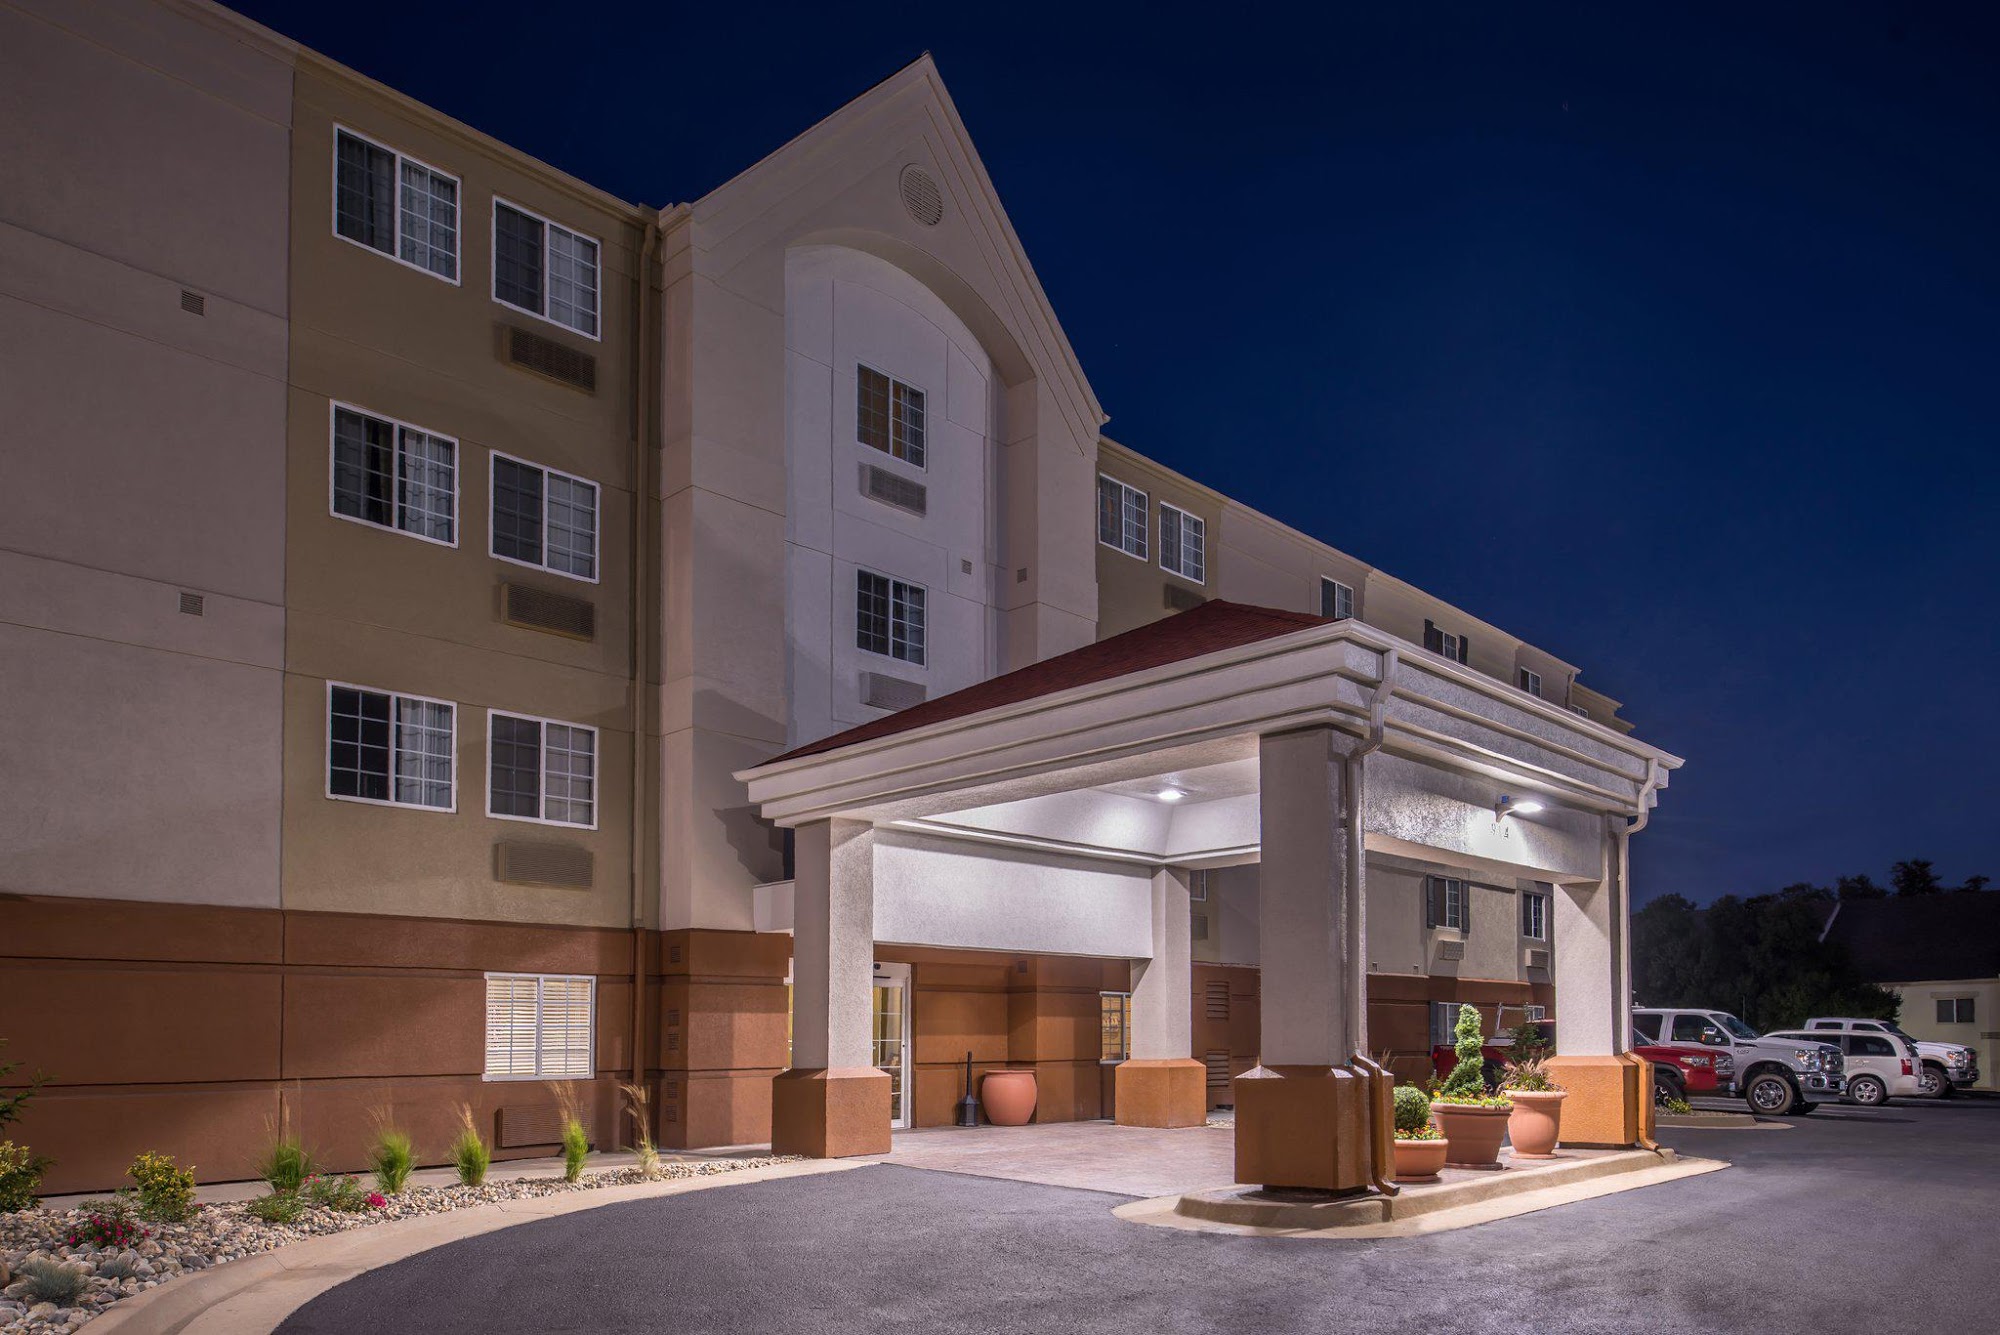 Candlewood Suites Topeka West, an IHG Hotel